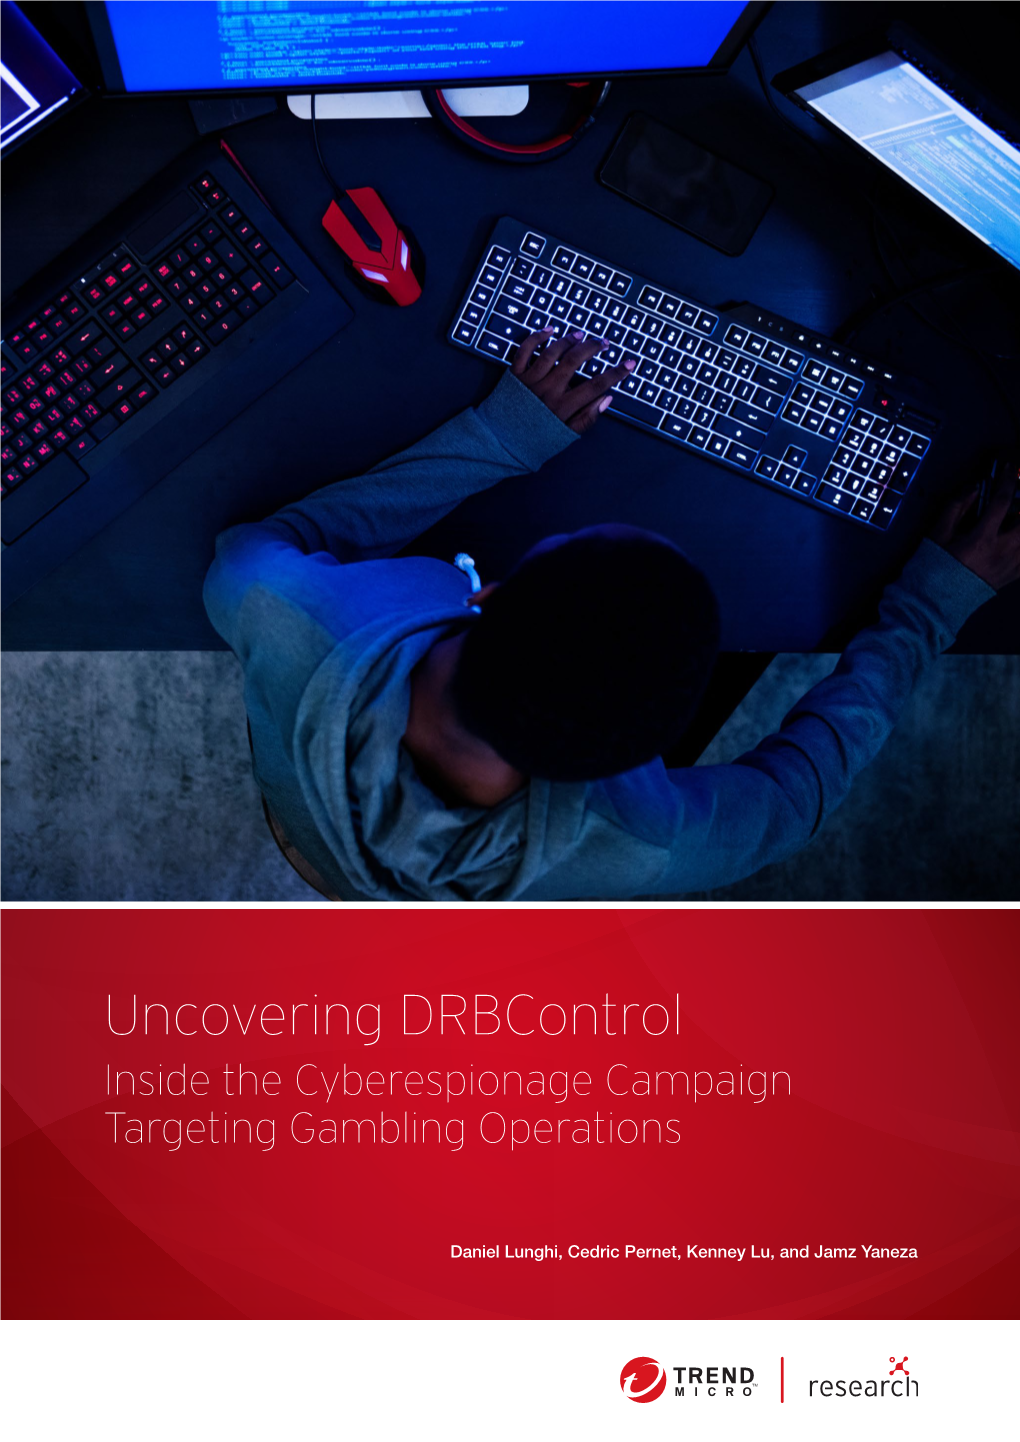 Uncovering Drbcontrol: Inside the Cyberespionage Campaign Targeting Gambling Operations Figure 2